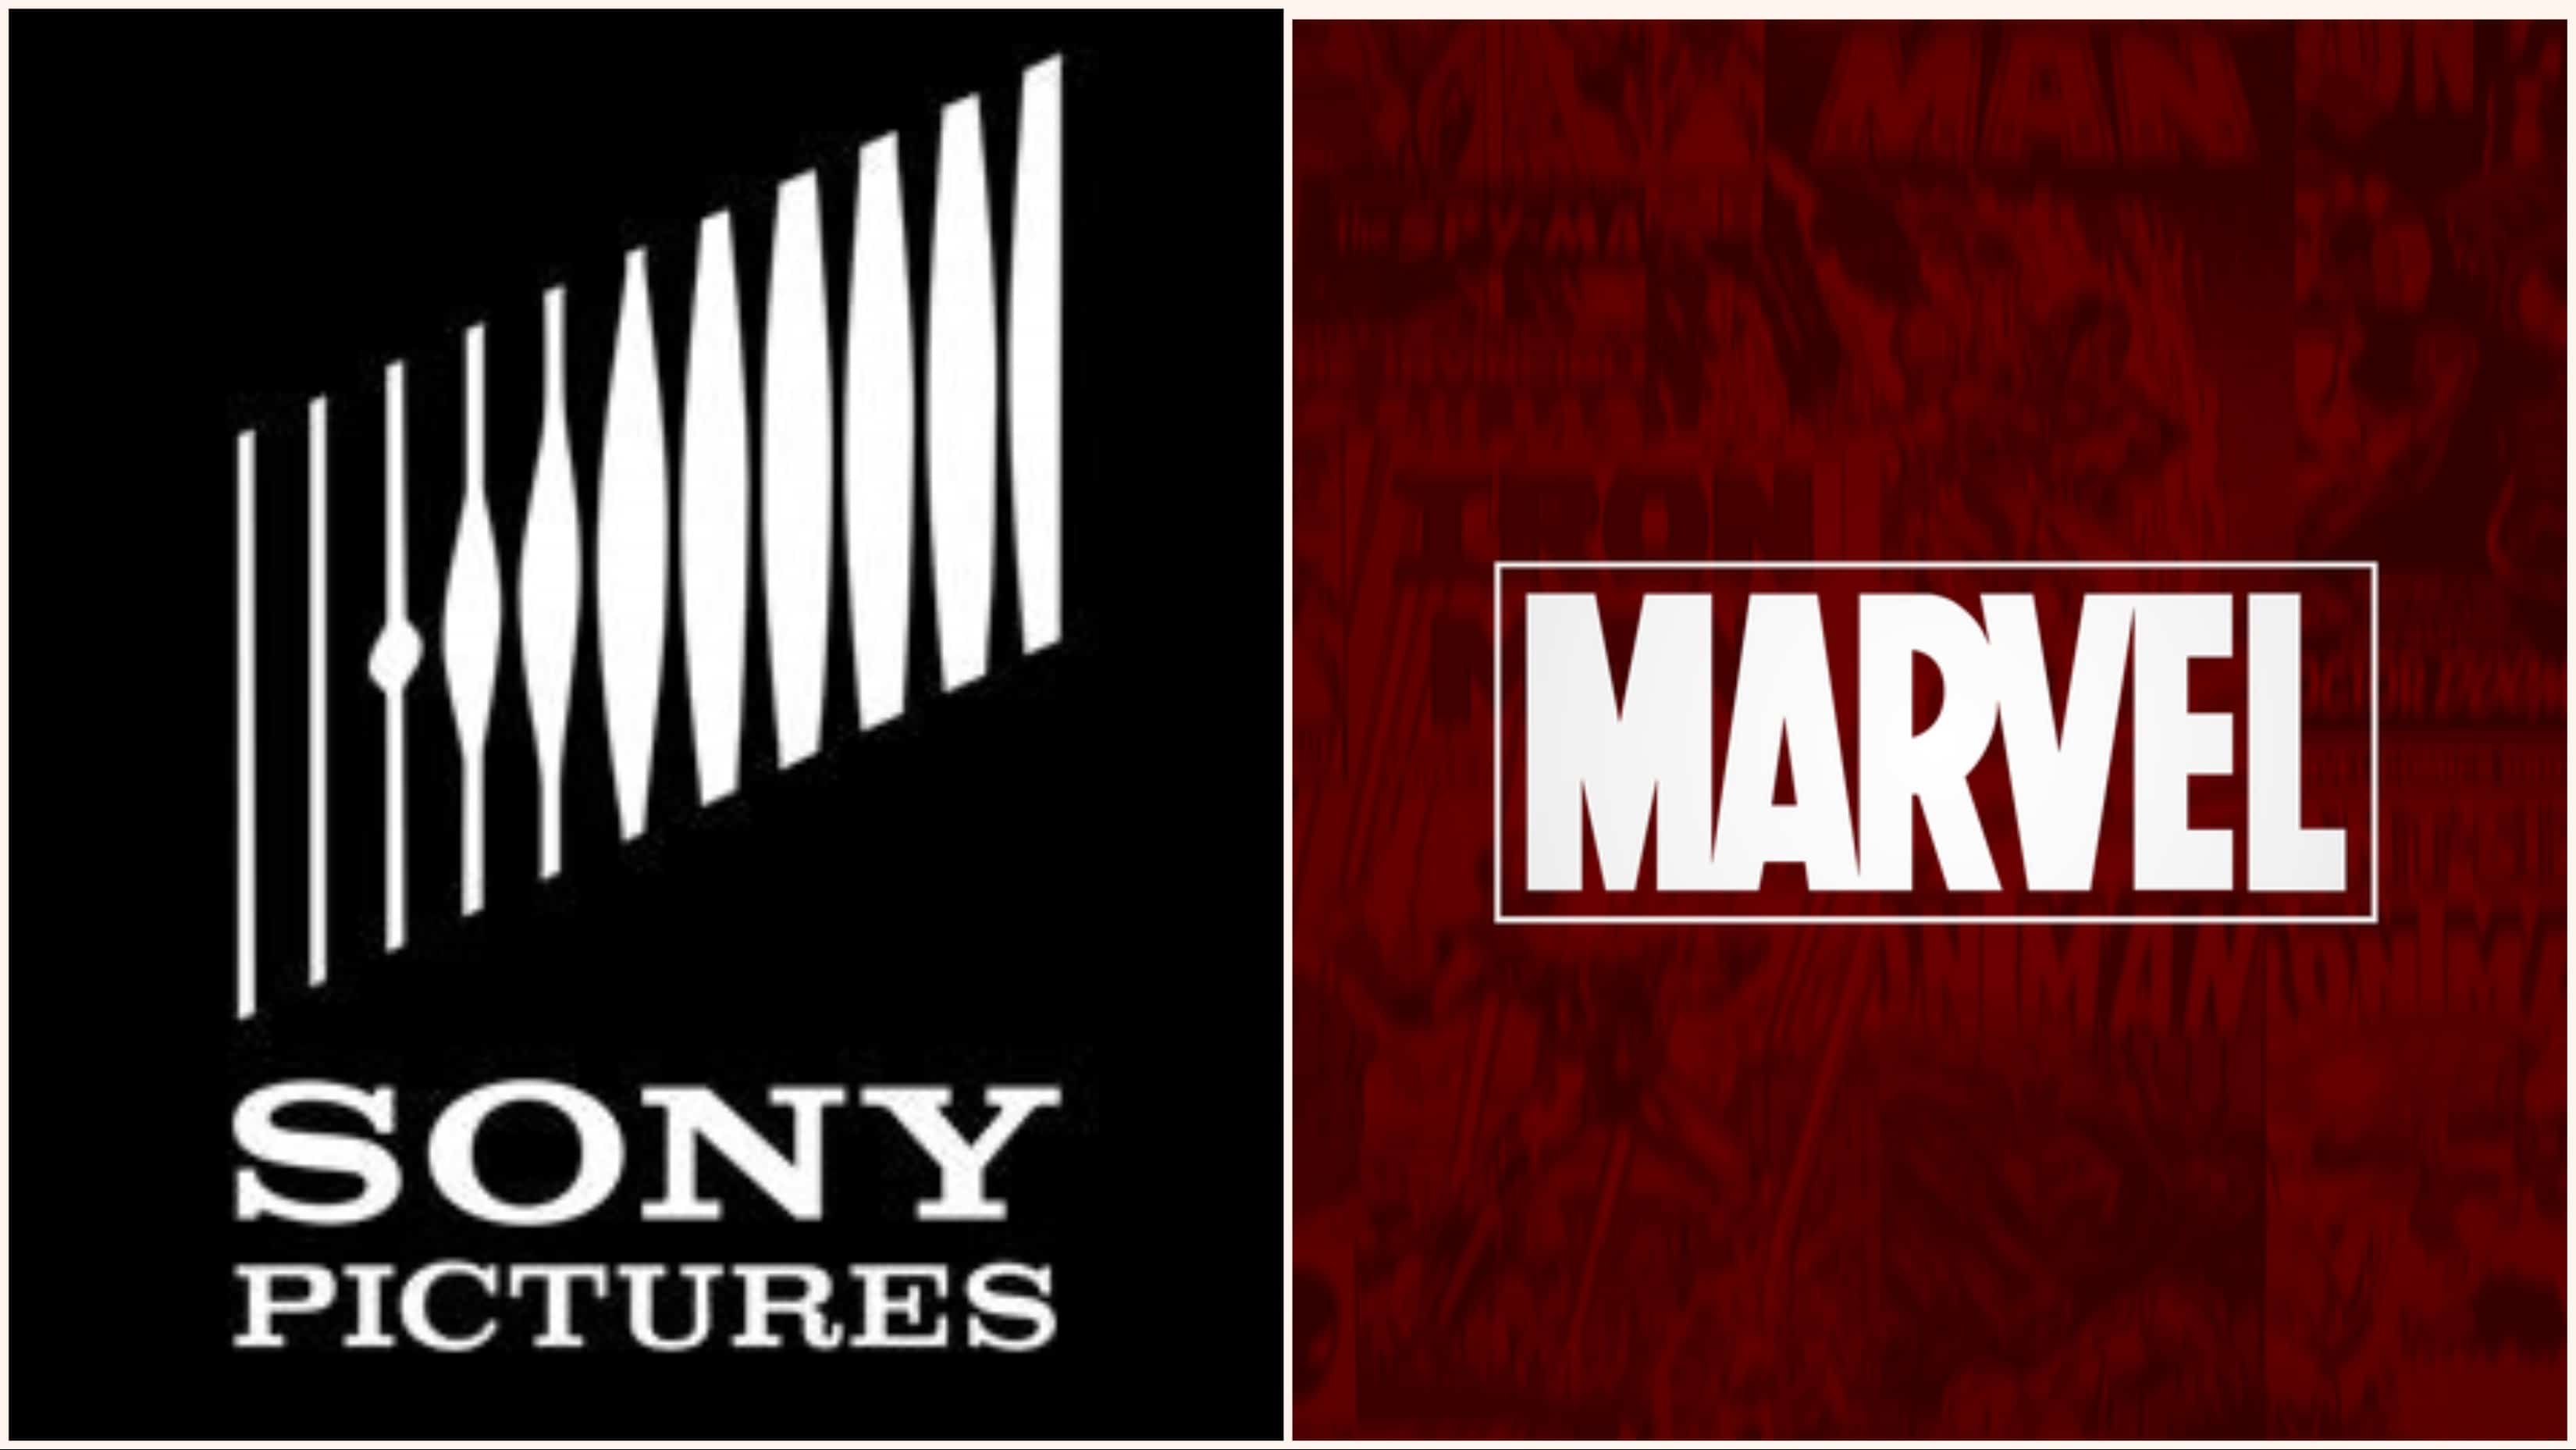 Sony To Release 2 Marvel Films In 2020